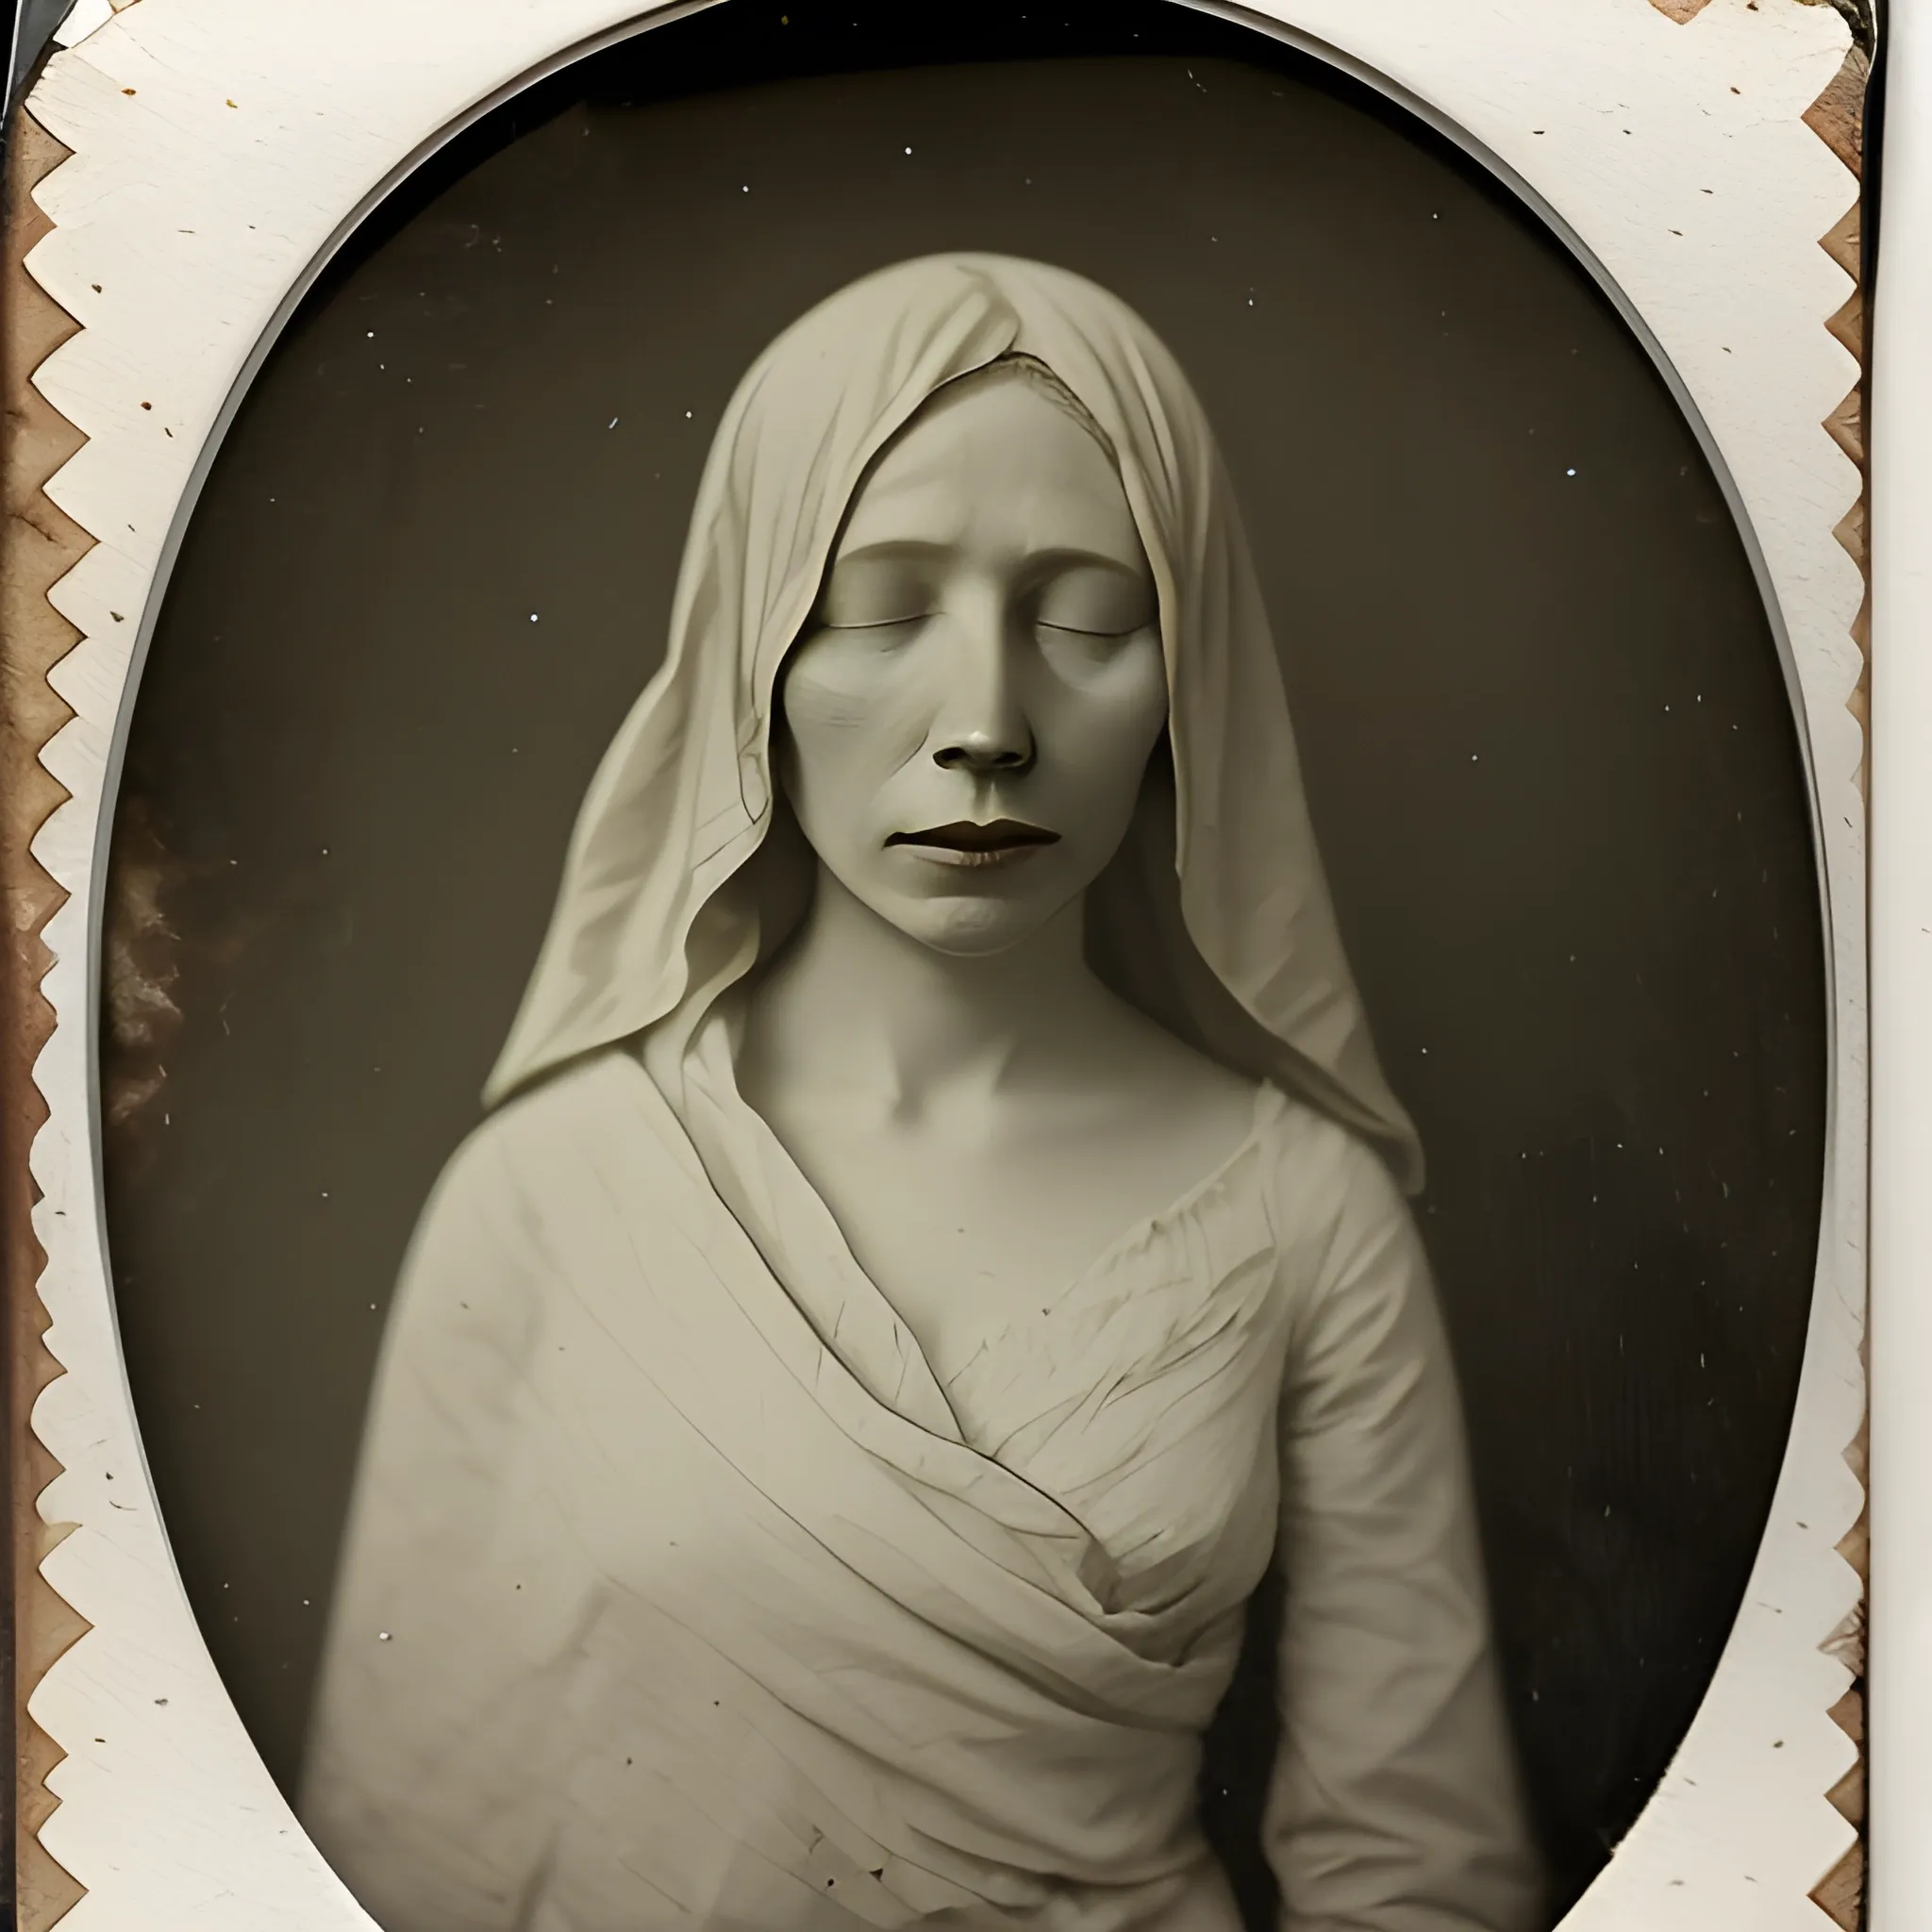 tintype photograph of a pale woman draped in a white sheet, pale skin, (distressed image:0.5), no eyes, no eyeballs, missing eyes, highly detailed

